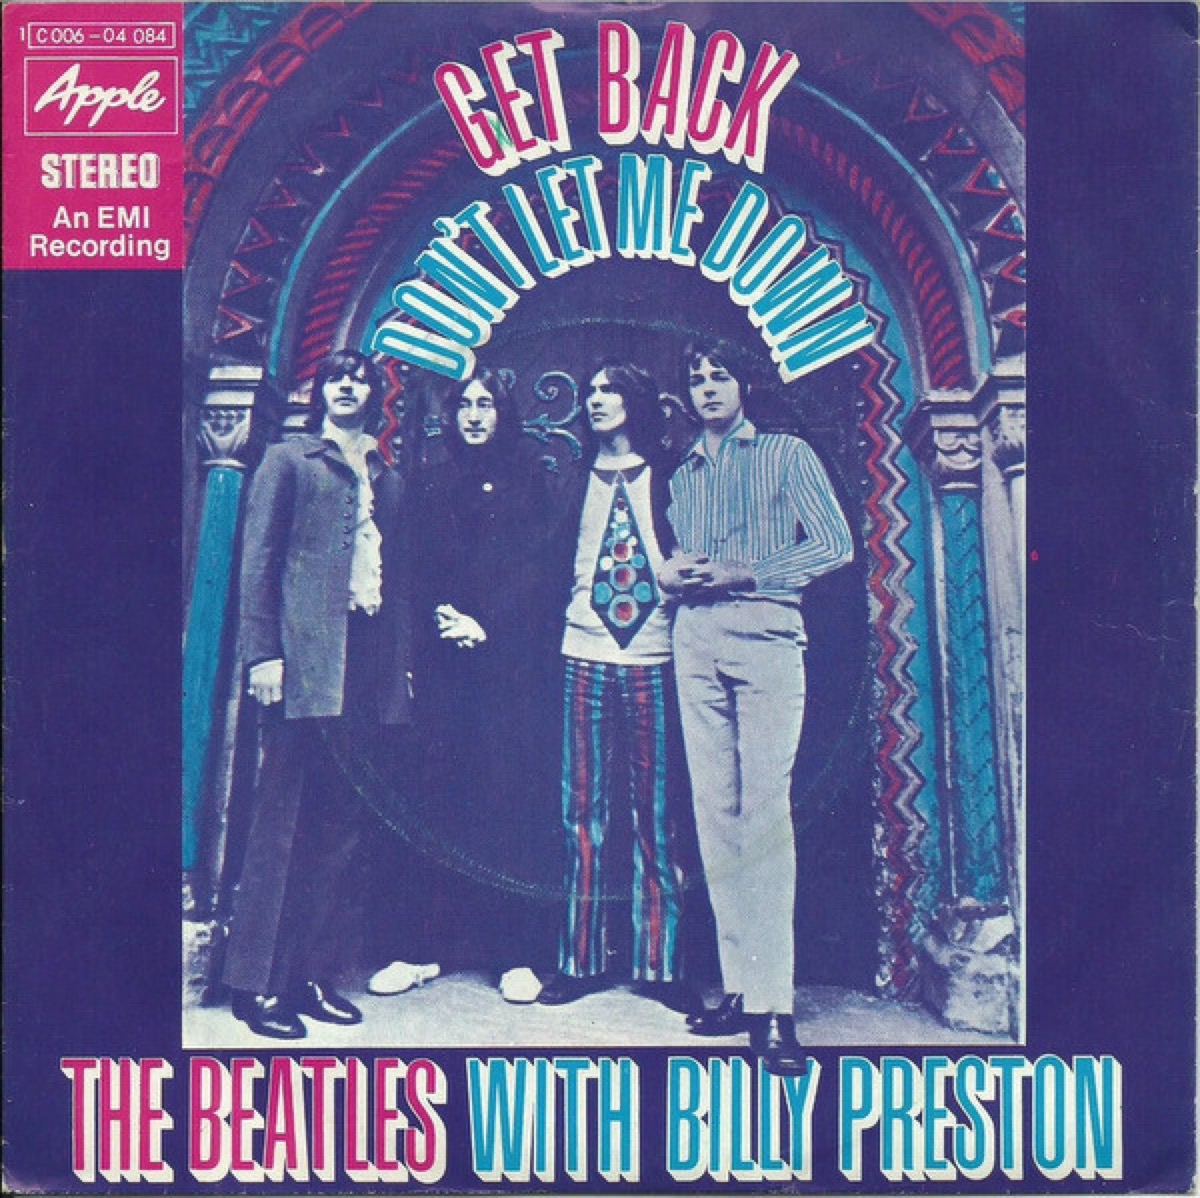 get back billy preston and the beatles, 50 songs 50 year